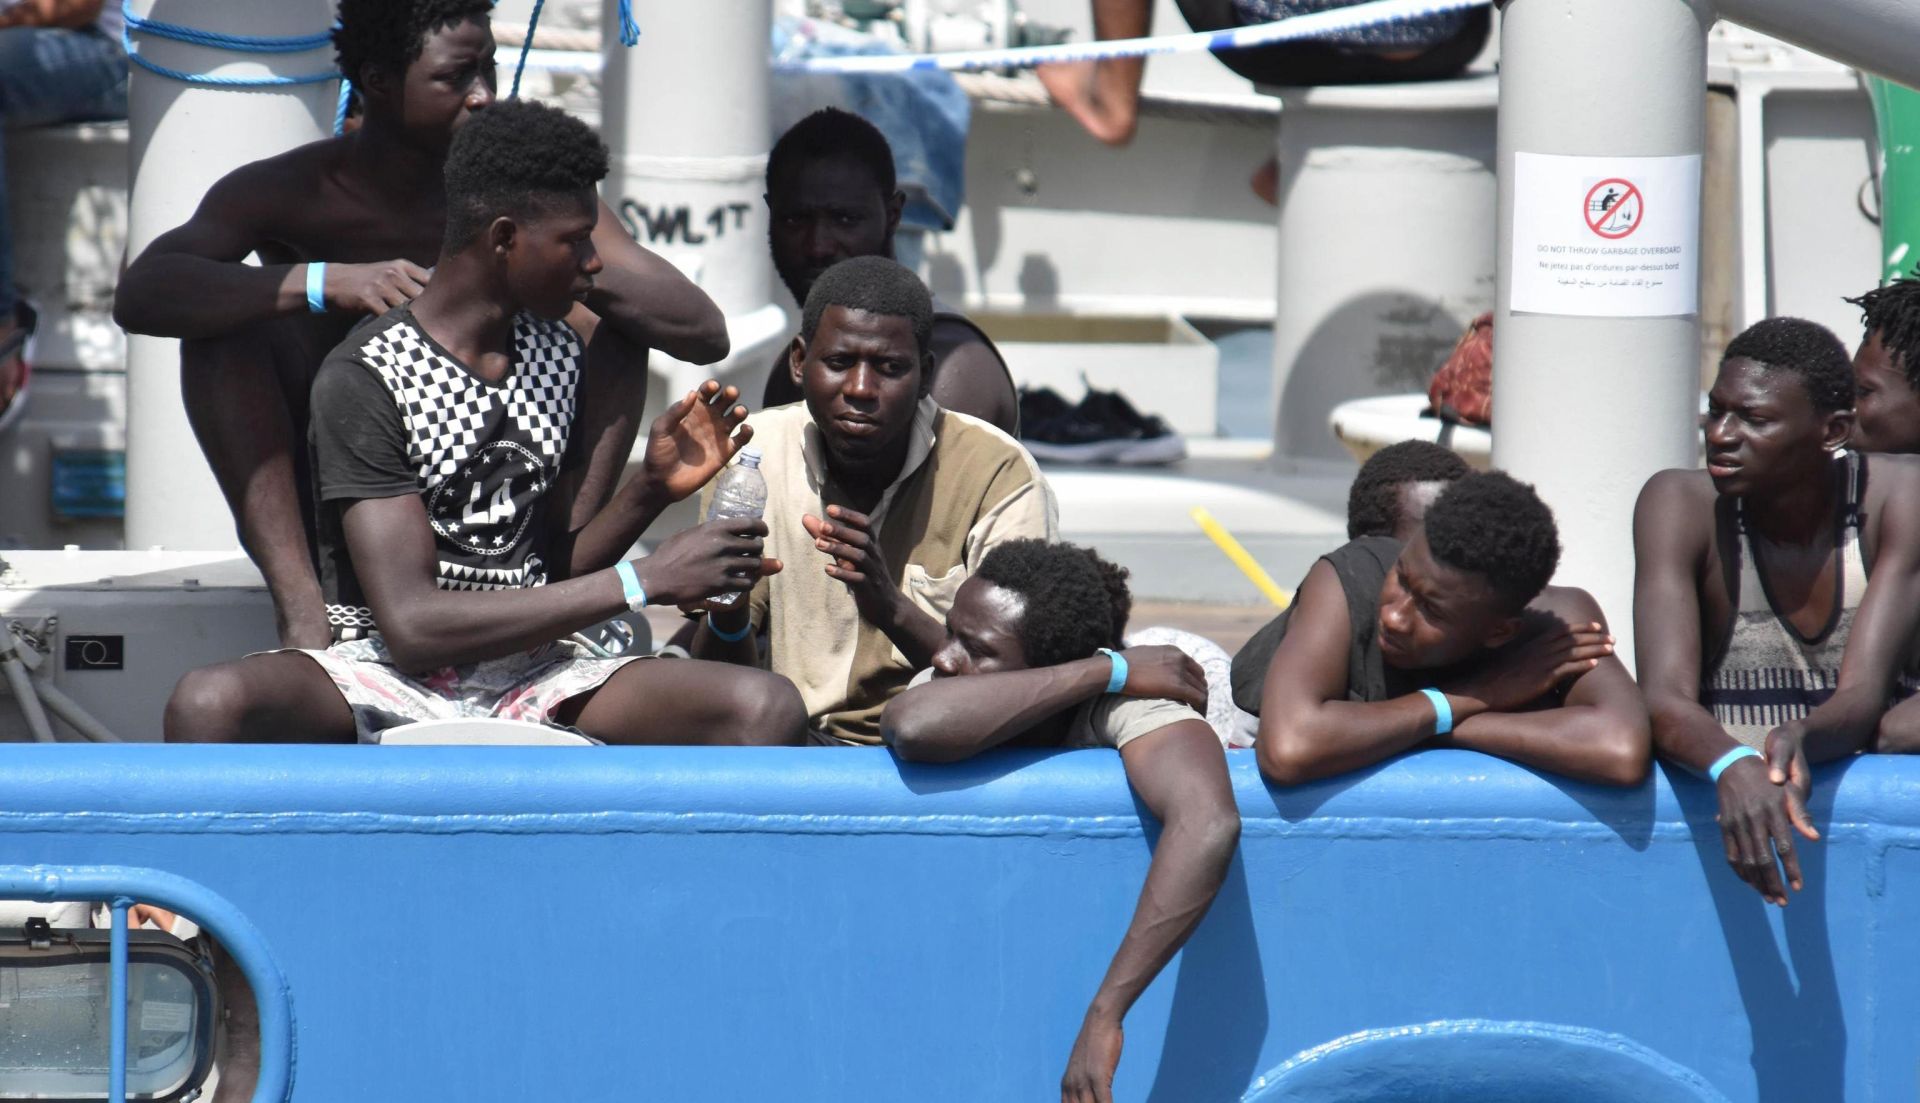 epa06059390 Some of the 650 migrants who were rescued by the Swedish ship Frontex in Mediterranean Sea off the Libyan coast, wait to disembark  in Catania, Italy, 01 July 2017. Nine migrants from the group were found dead. Italy has experienced a surge in refugee and migrant arrivals in recent months, and media outlets report that the Italian government is considering blocking boats carrying migrants from landing at its ports.  EPA/ORIETTA SCARDINO